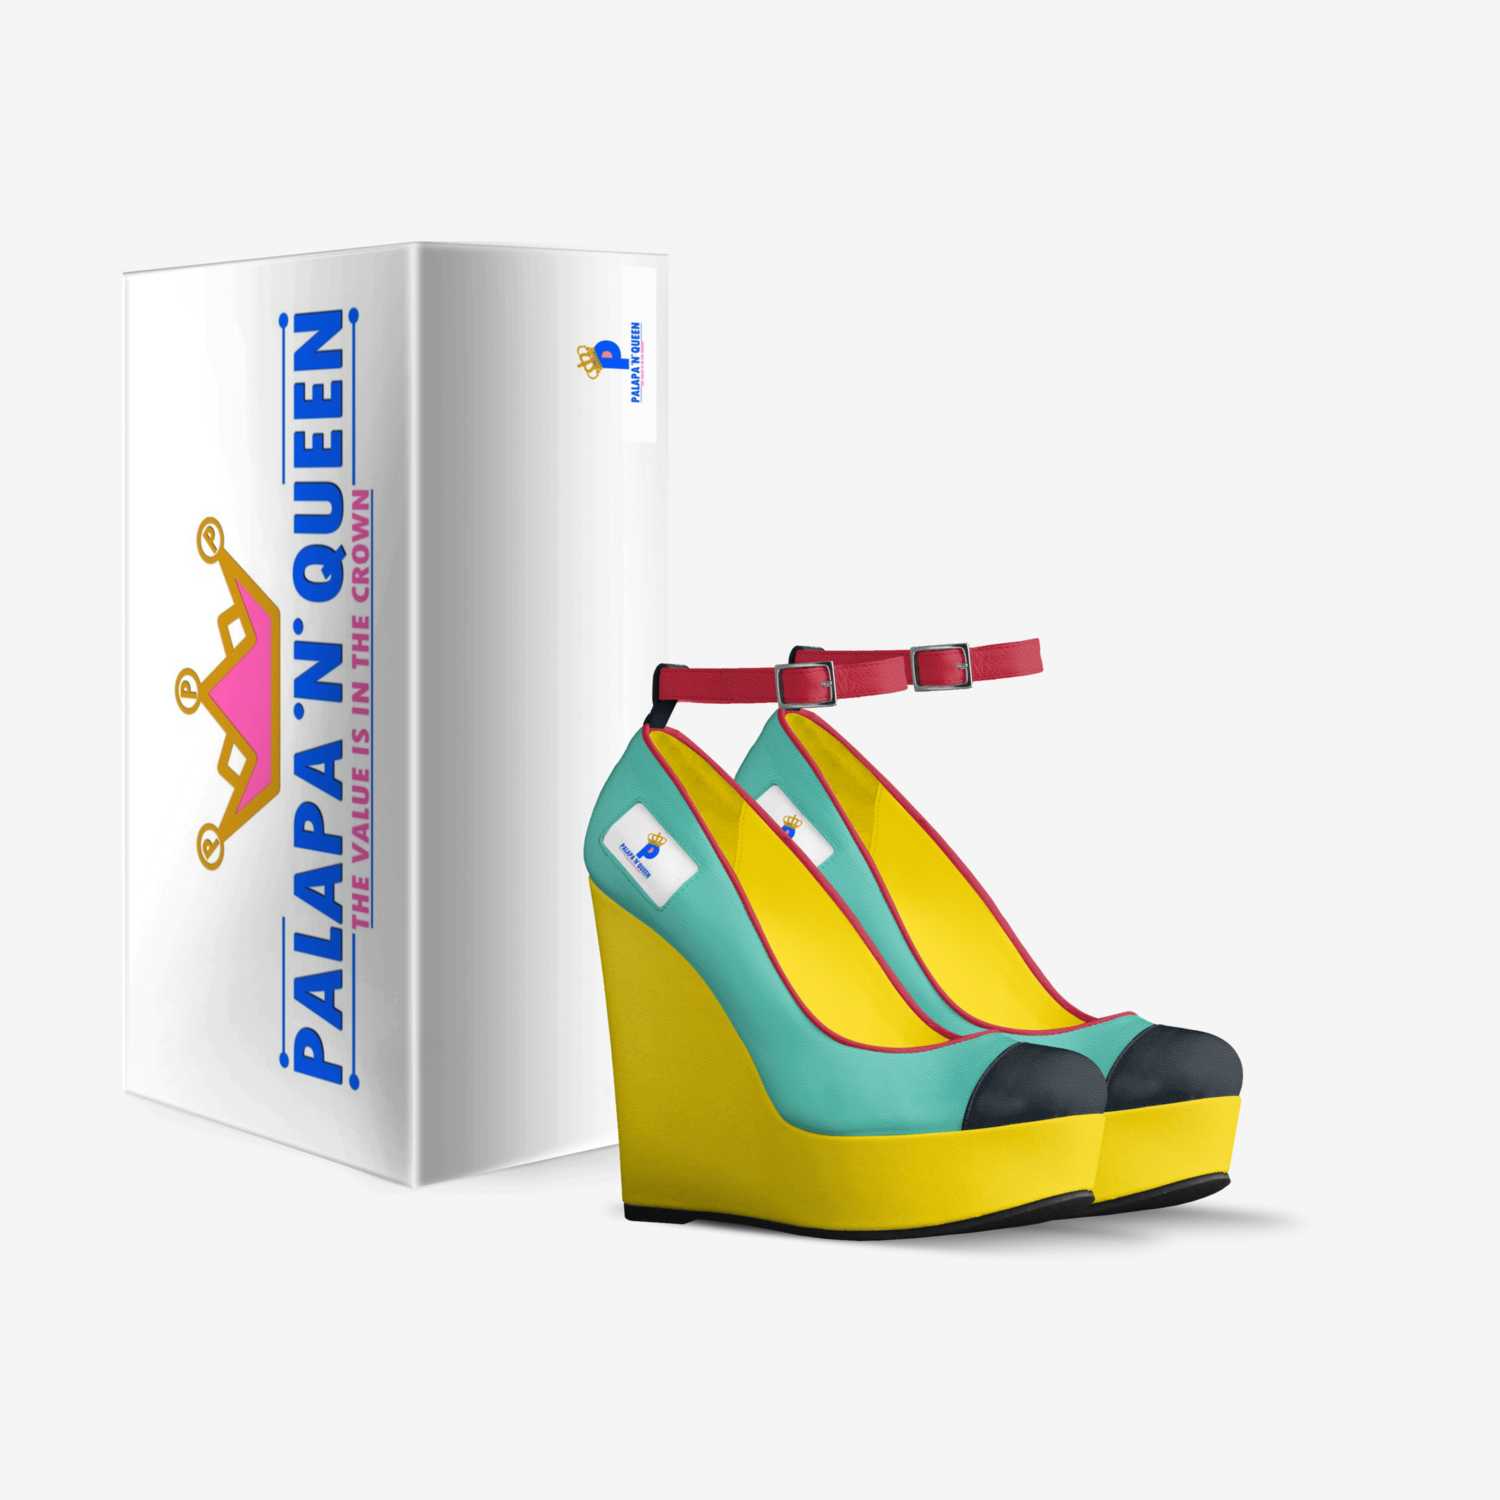 Palapa 'n' Queen  custom made in Italy shoes by Niina Nia Kabesa | Box view